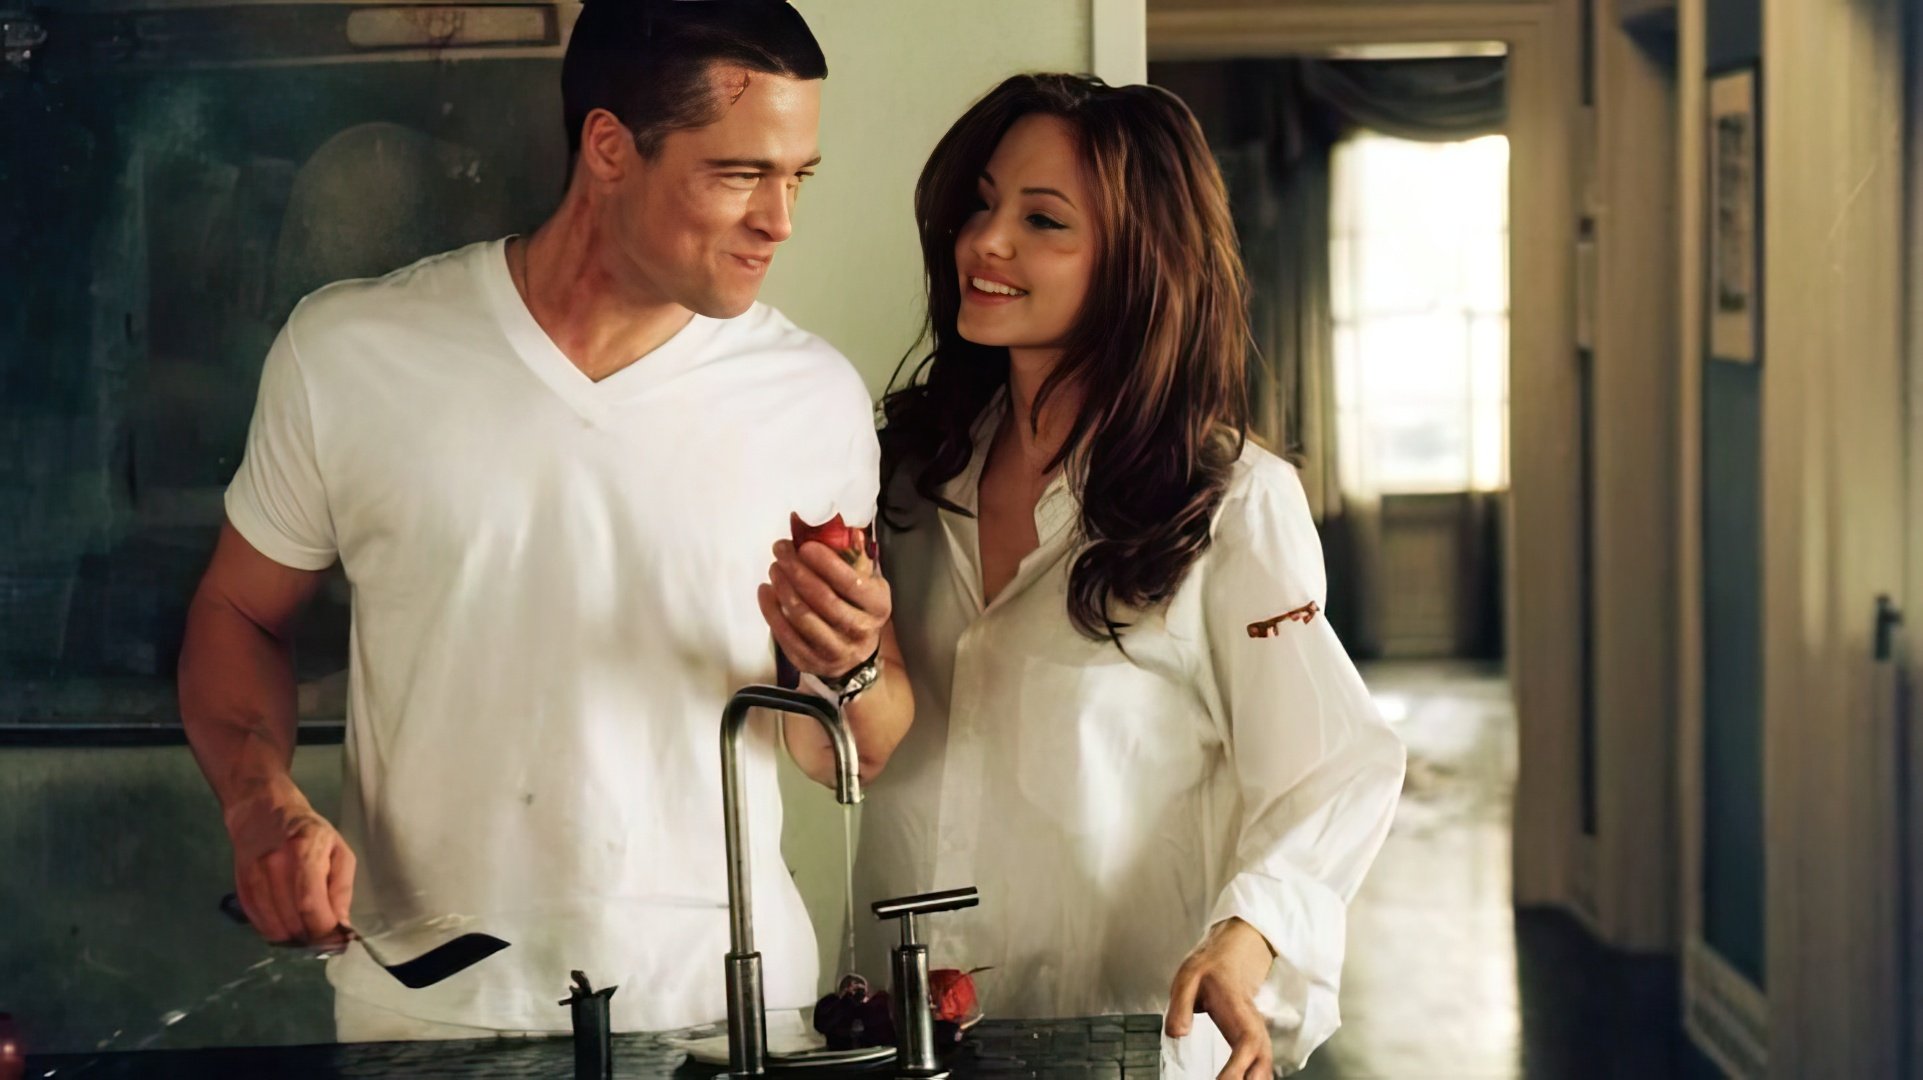 A scene from the movie Mr. & Mrs. Smith